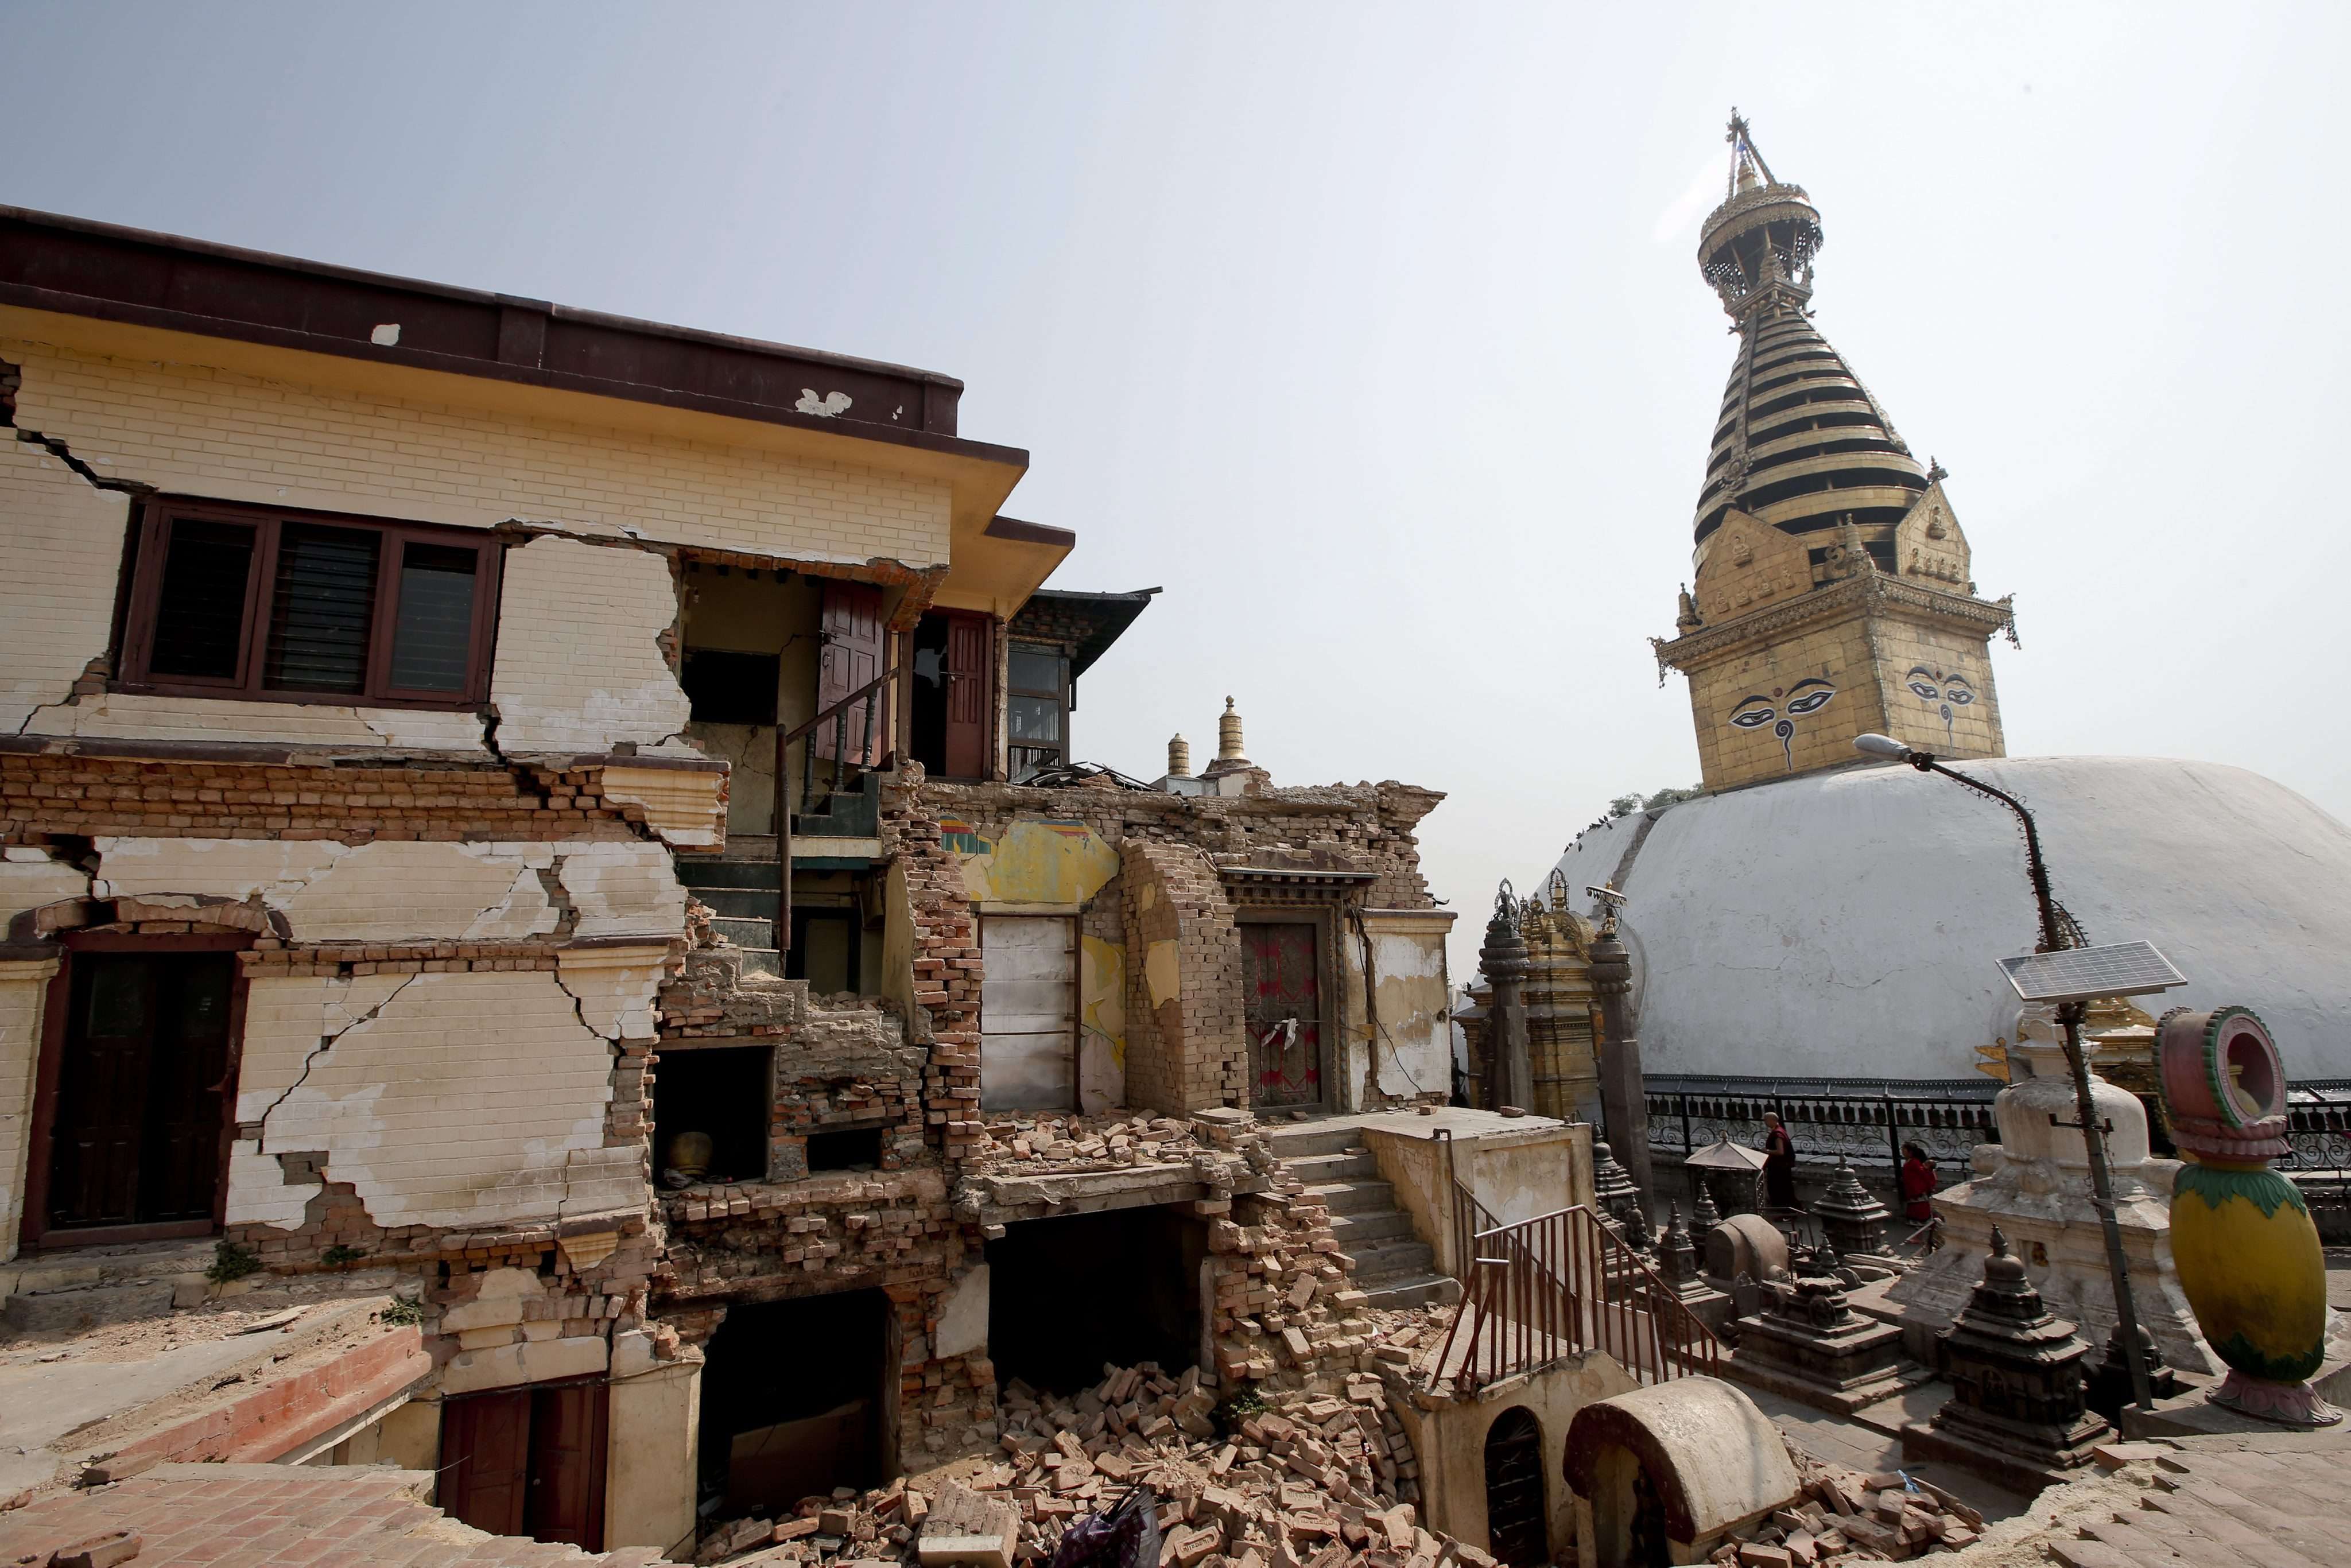 The grounds of Swayambhunath Stupa, a UNESCO world heritage site, still shows damage from the 2015 earthquake one year later. Photo: EPA